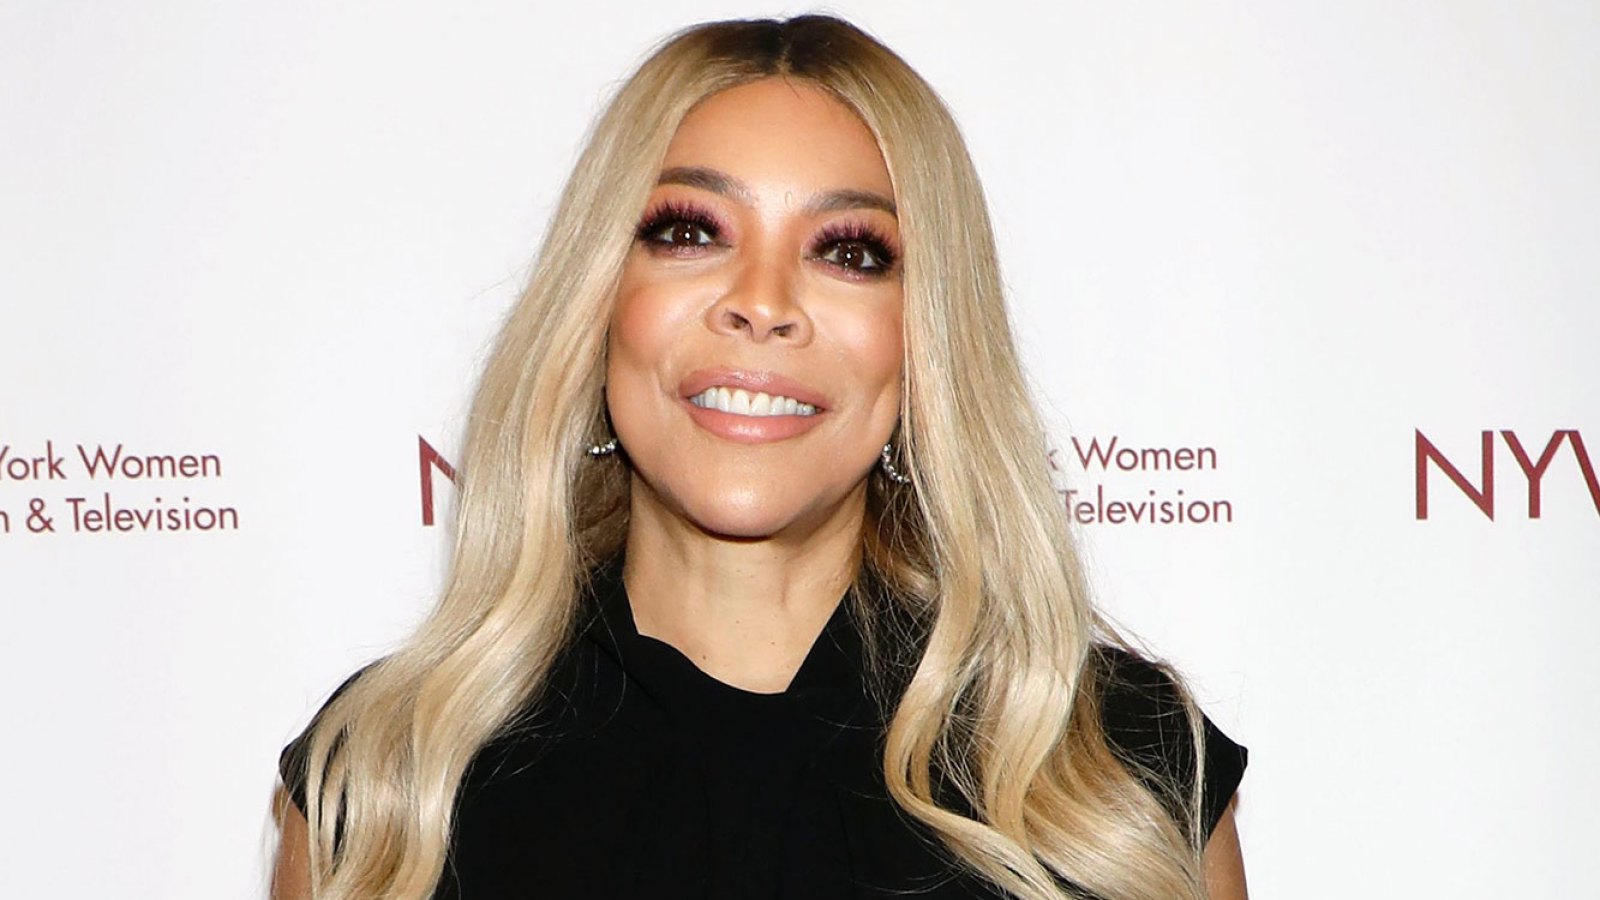 Wendy Williams Drops $4.5 Million on High-Rise Apartment Amid Health Issues